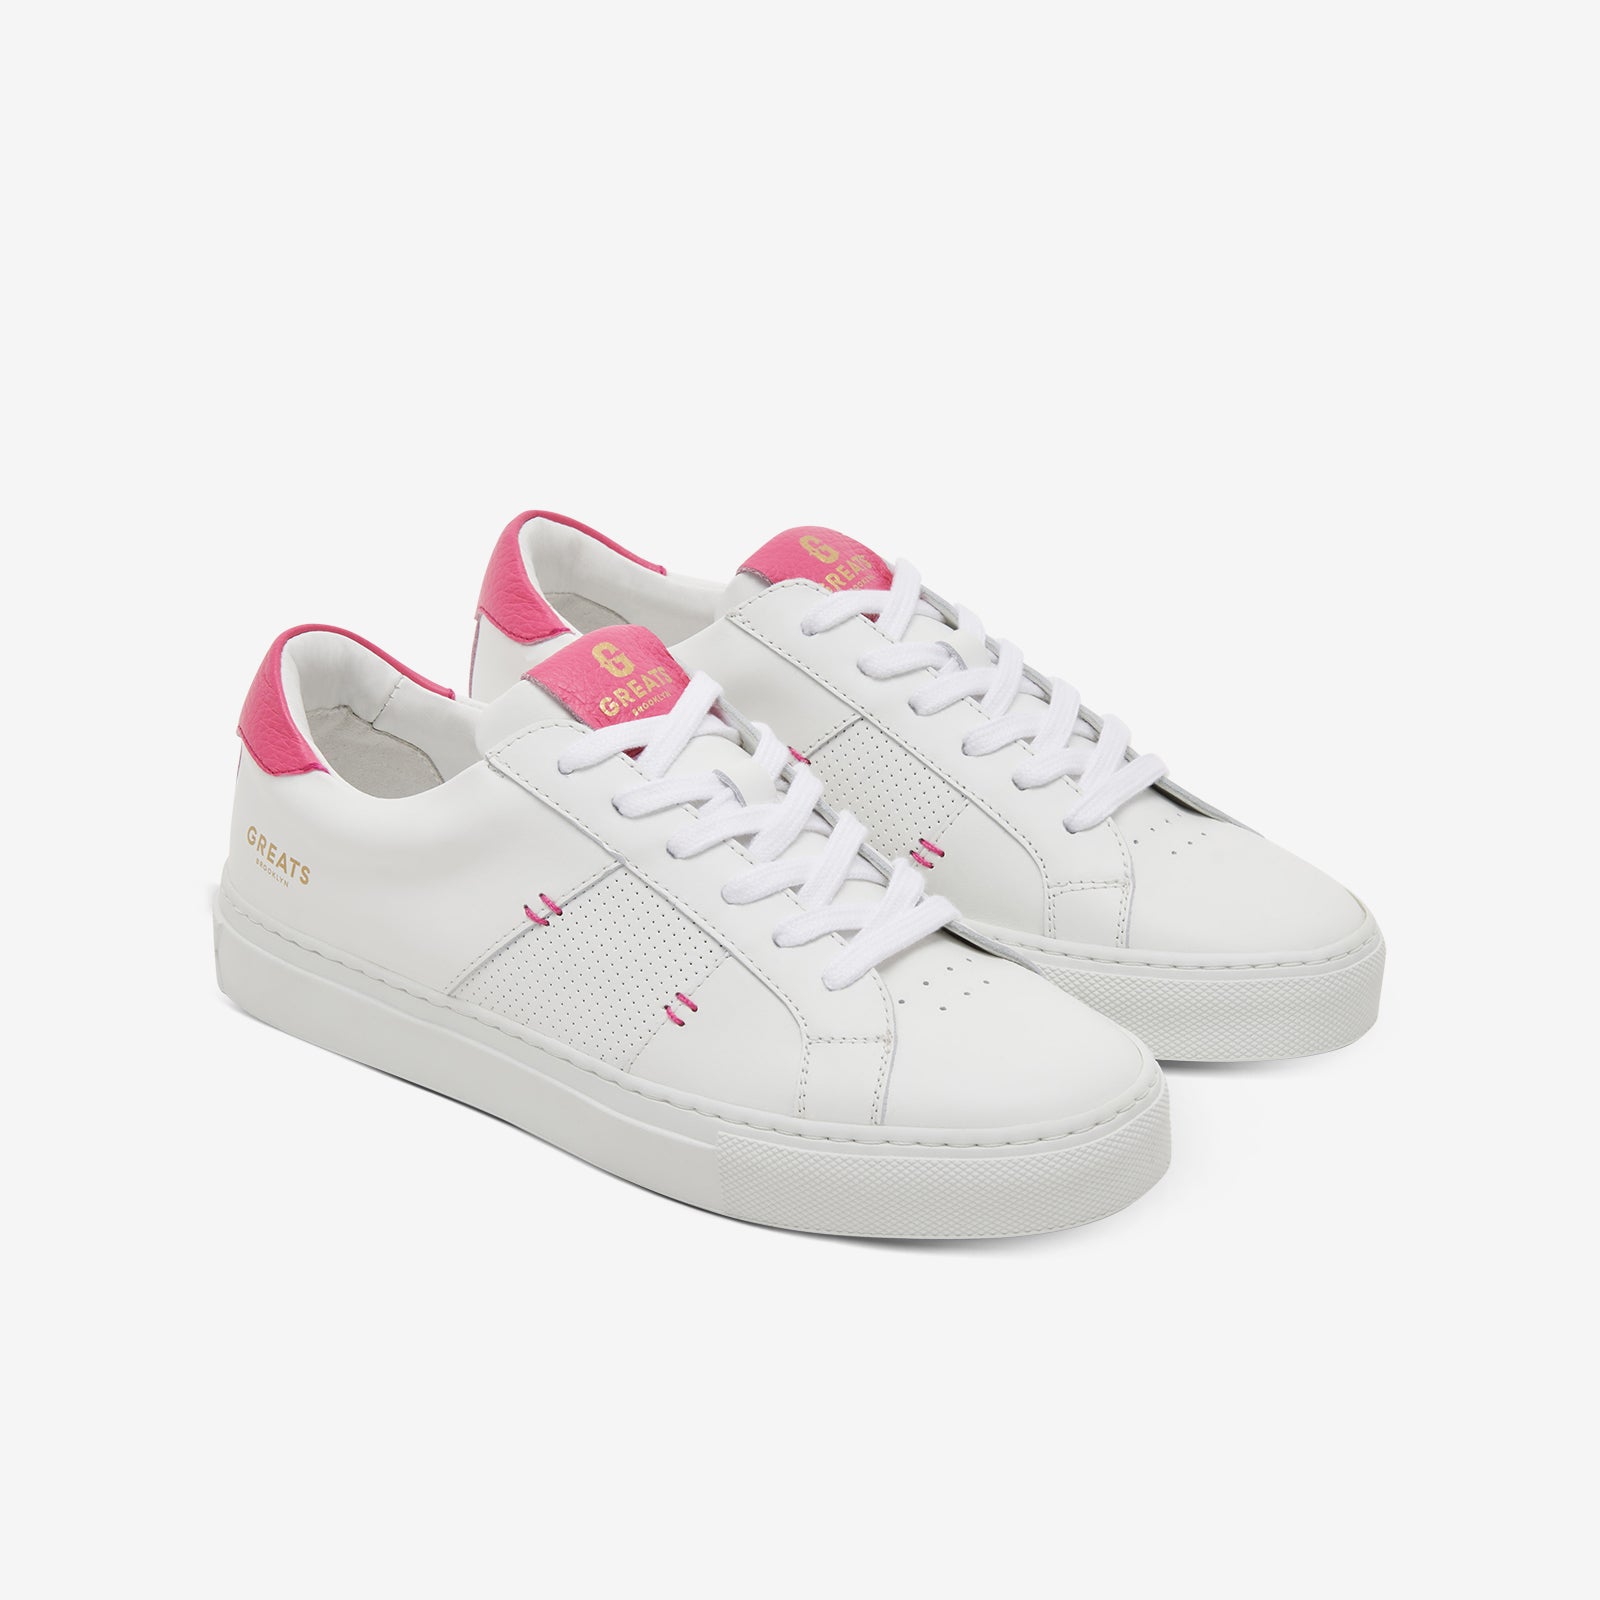 GREATS - The Royale 2.0 - White/Neon Pink - Women's Shoe